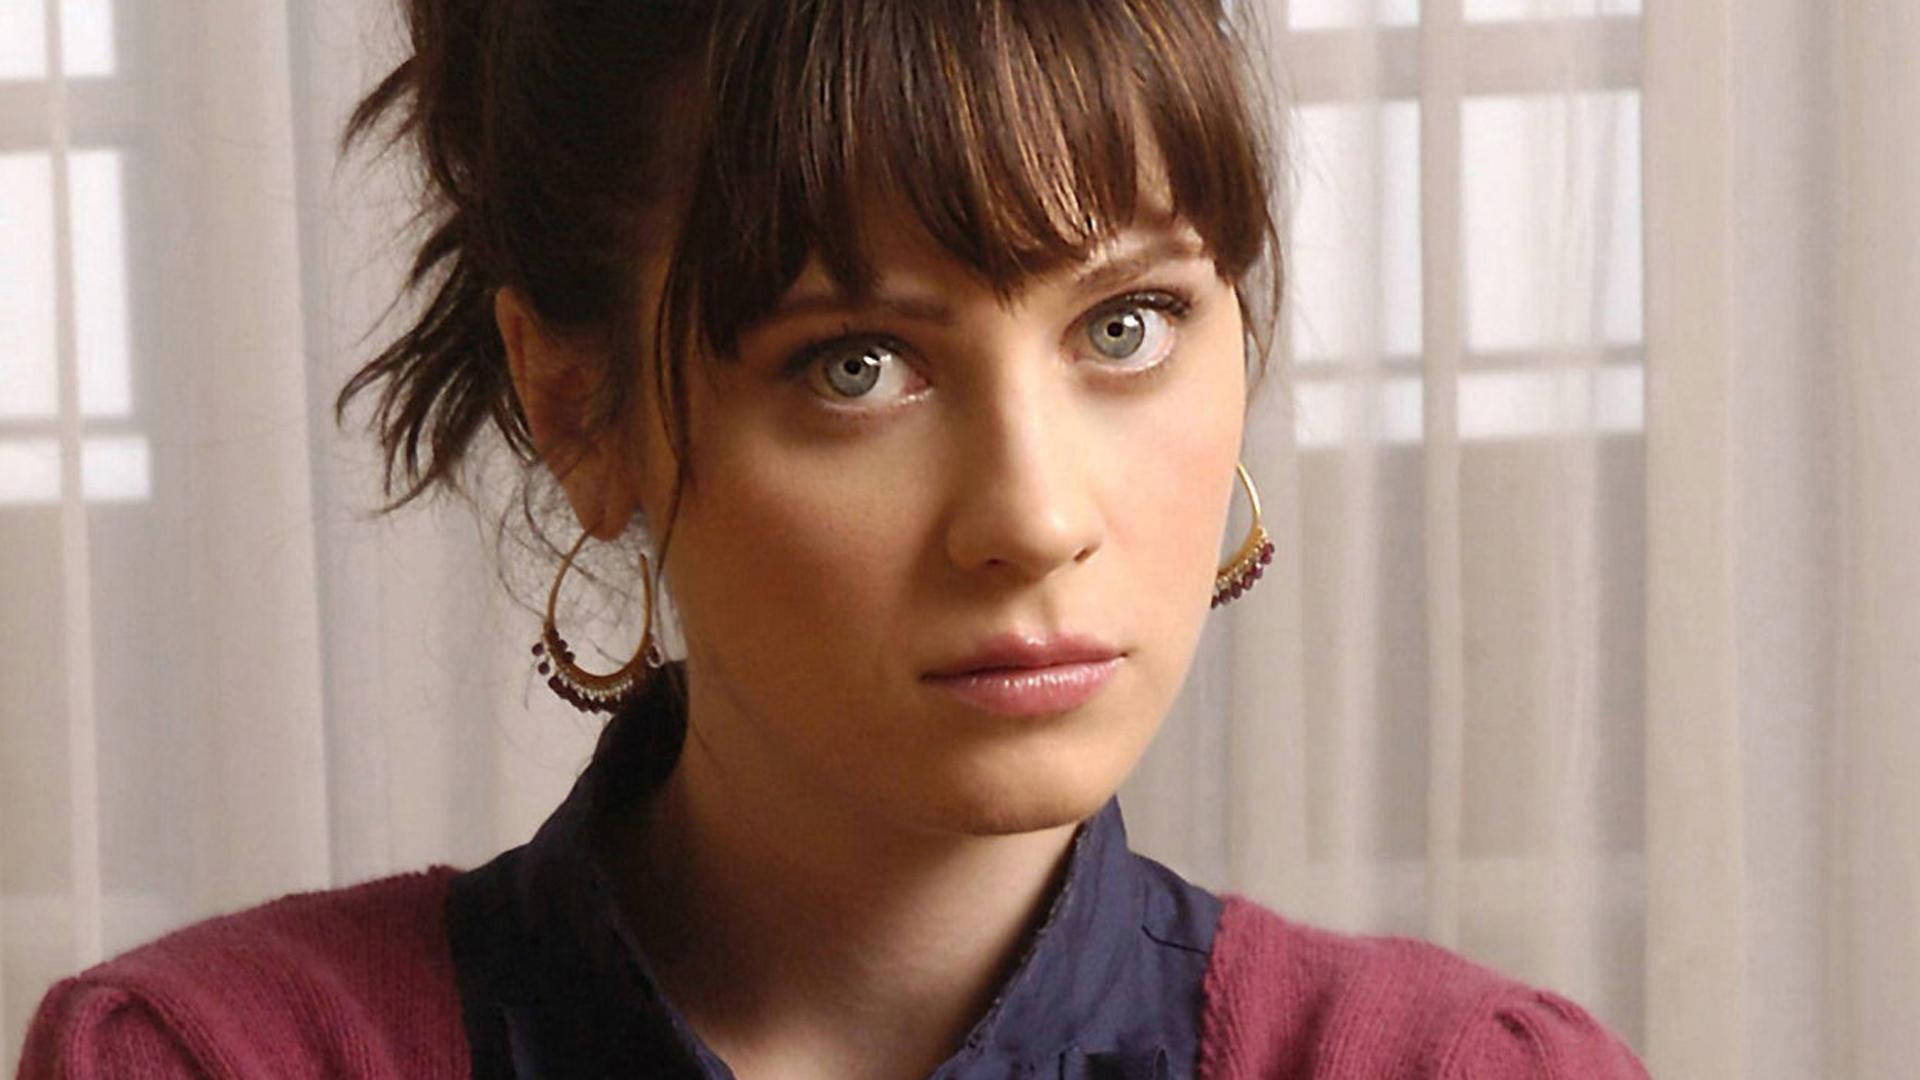 Zooey Deschanel With Hair Tied In Front Of Curtain Wallpaper